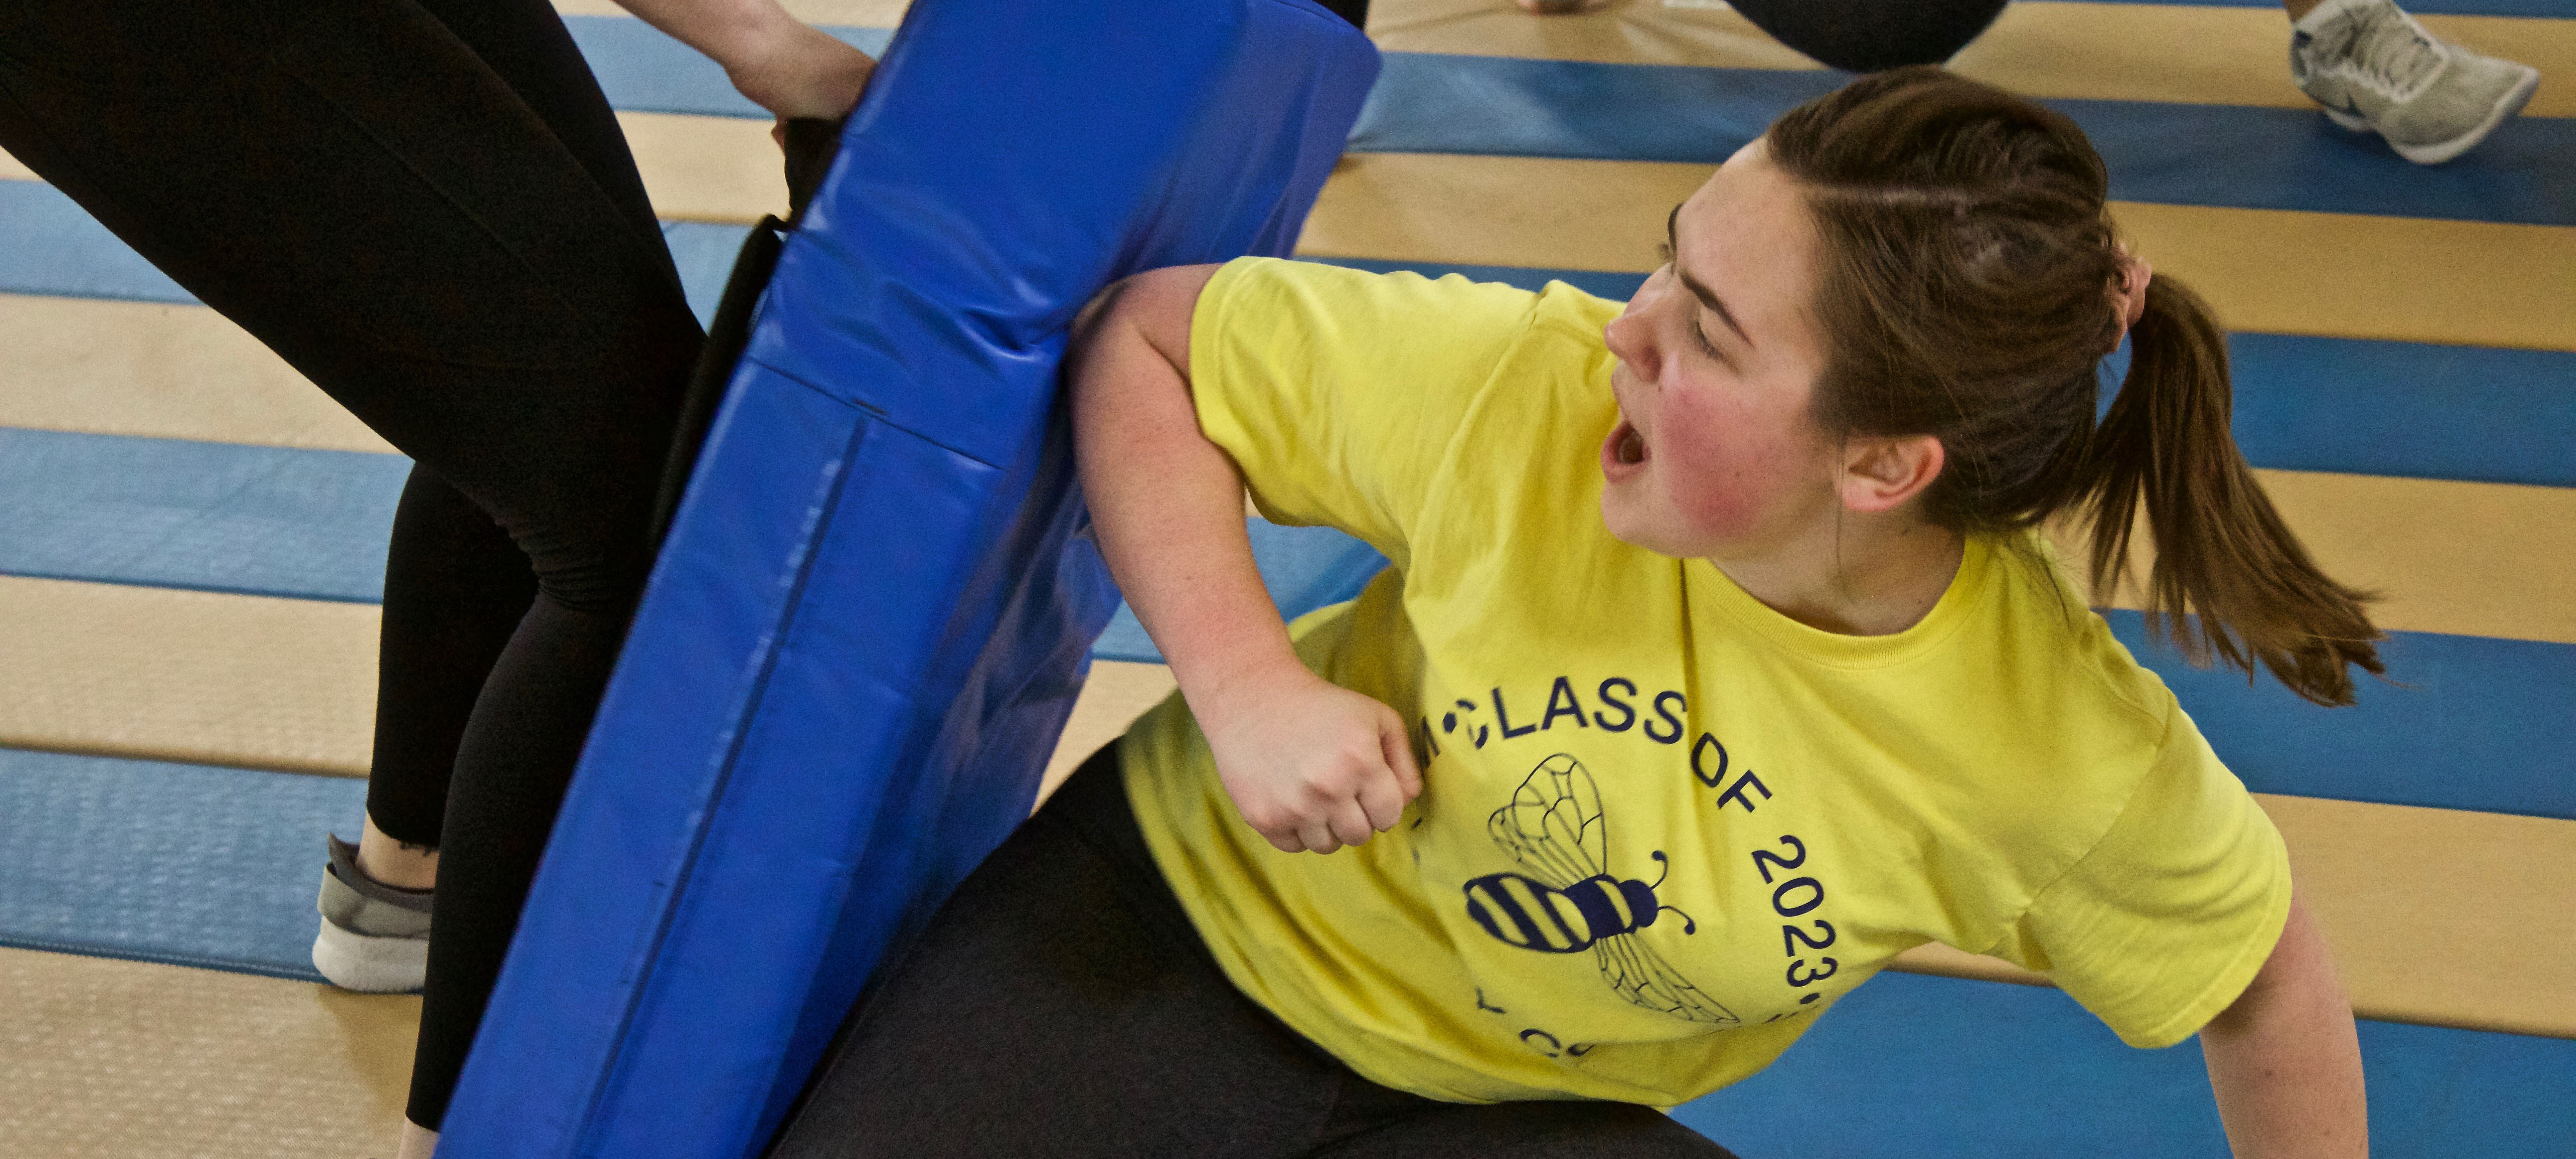 A student in a yellow Class of 2023 shirt is elbowing a blue, thick pad that another student is pushing onto them.